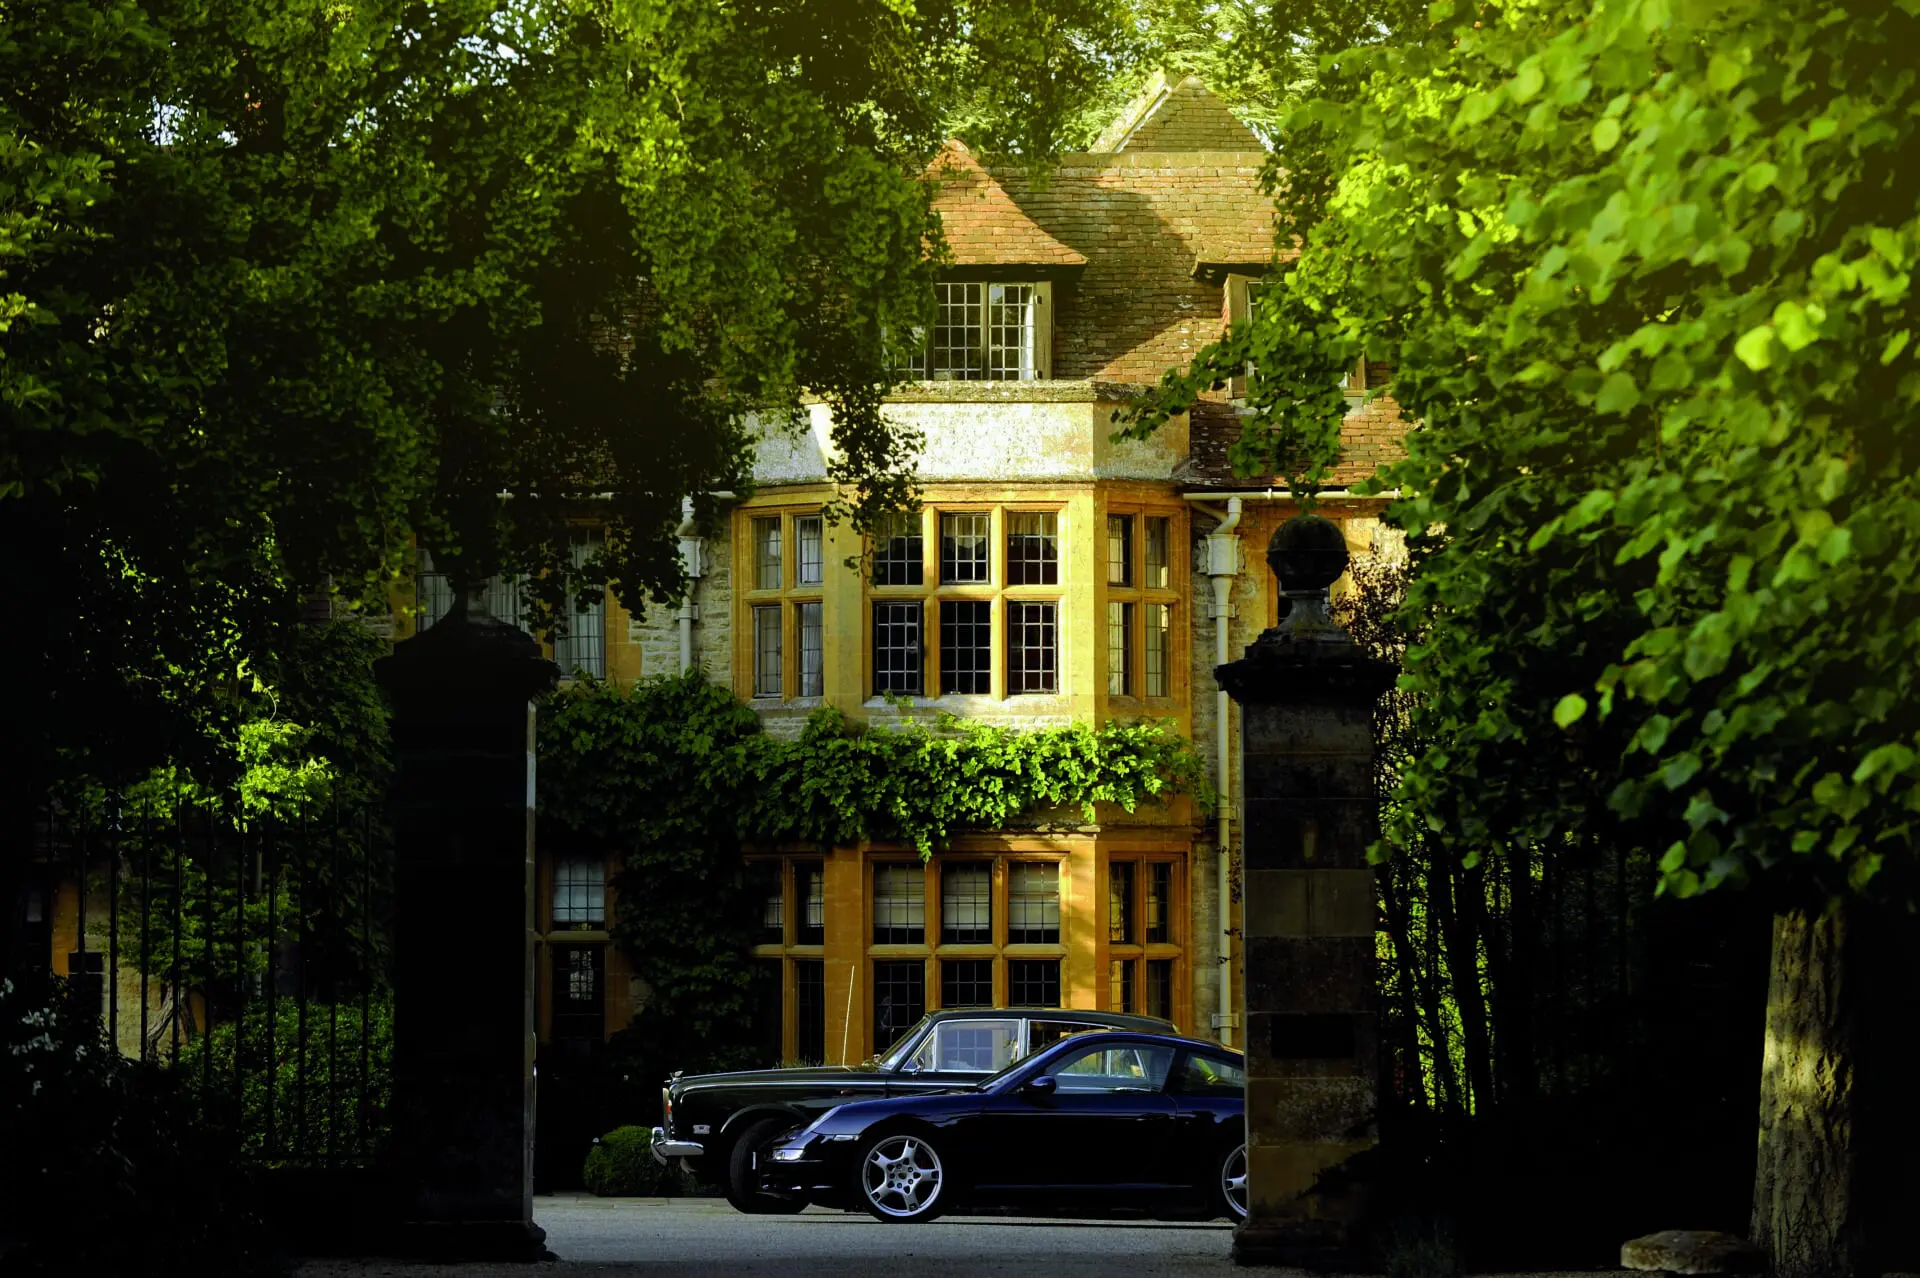 Close-up image of Le Manoir during summer